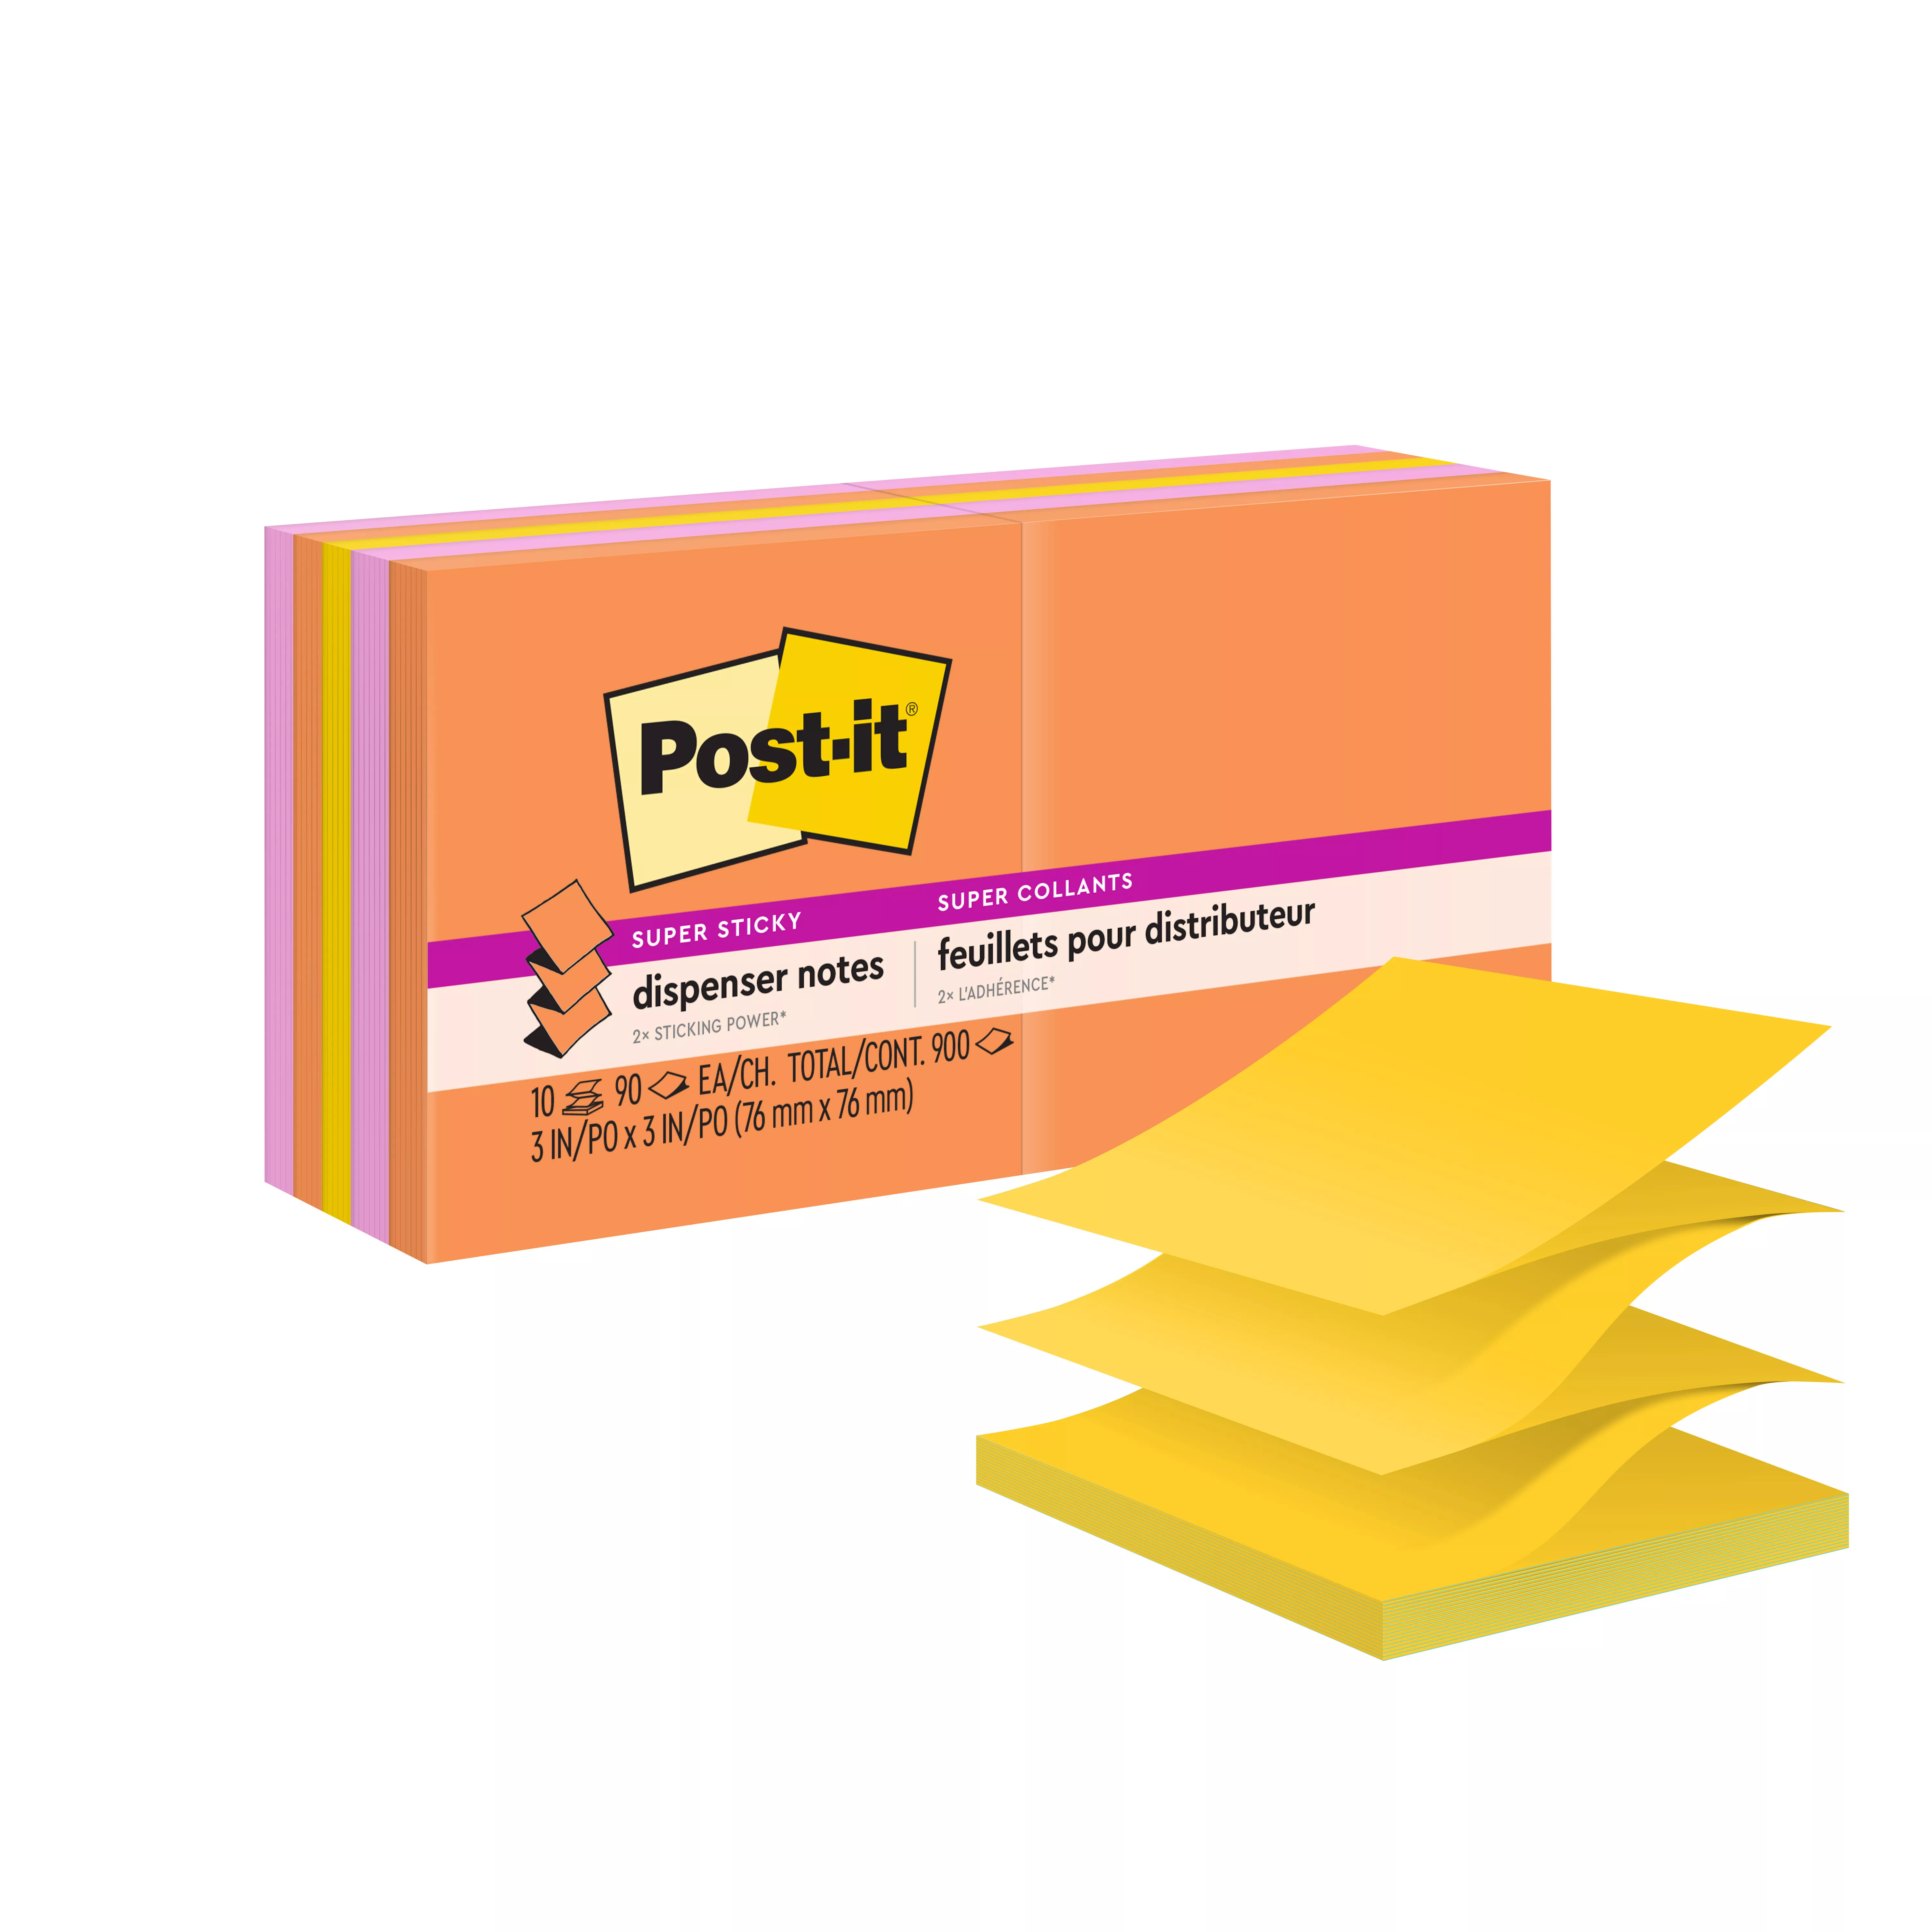 Post-it® Super Sticky Dispenser Pop-up Notes R330-10SSAU, 3 in x 3 in (76 mm x 76 mm), 10 pads, 90 sheets/pad